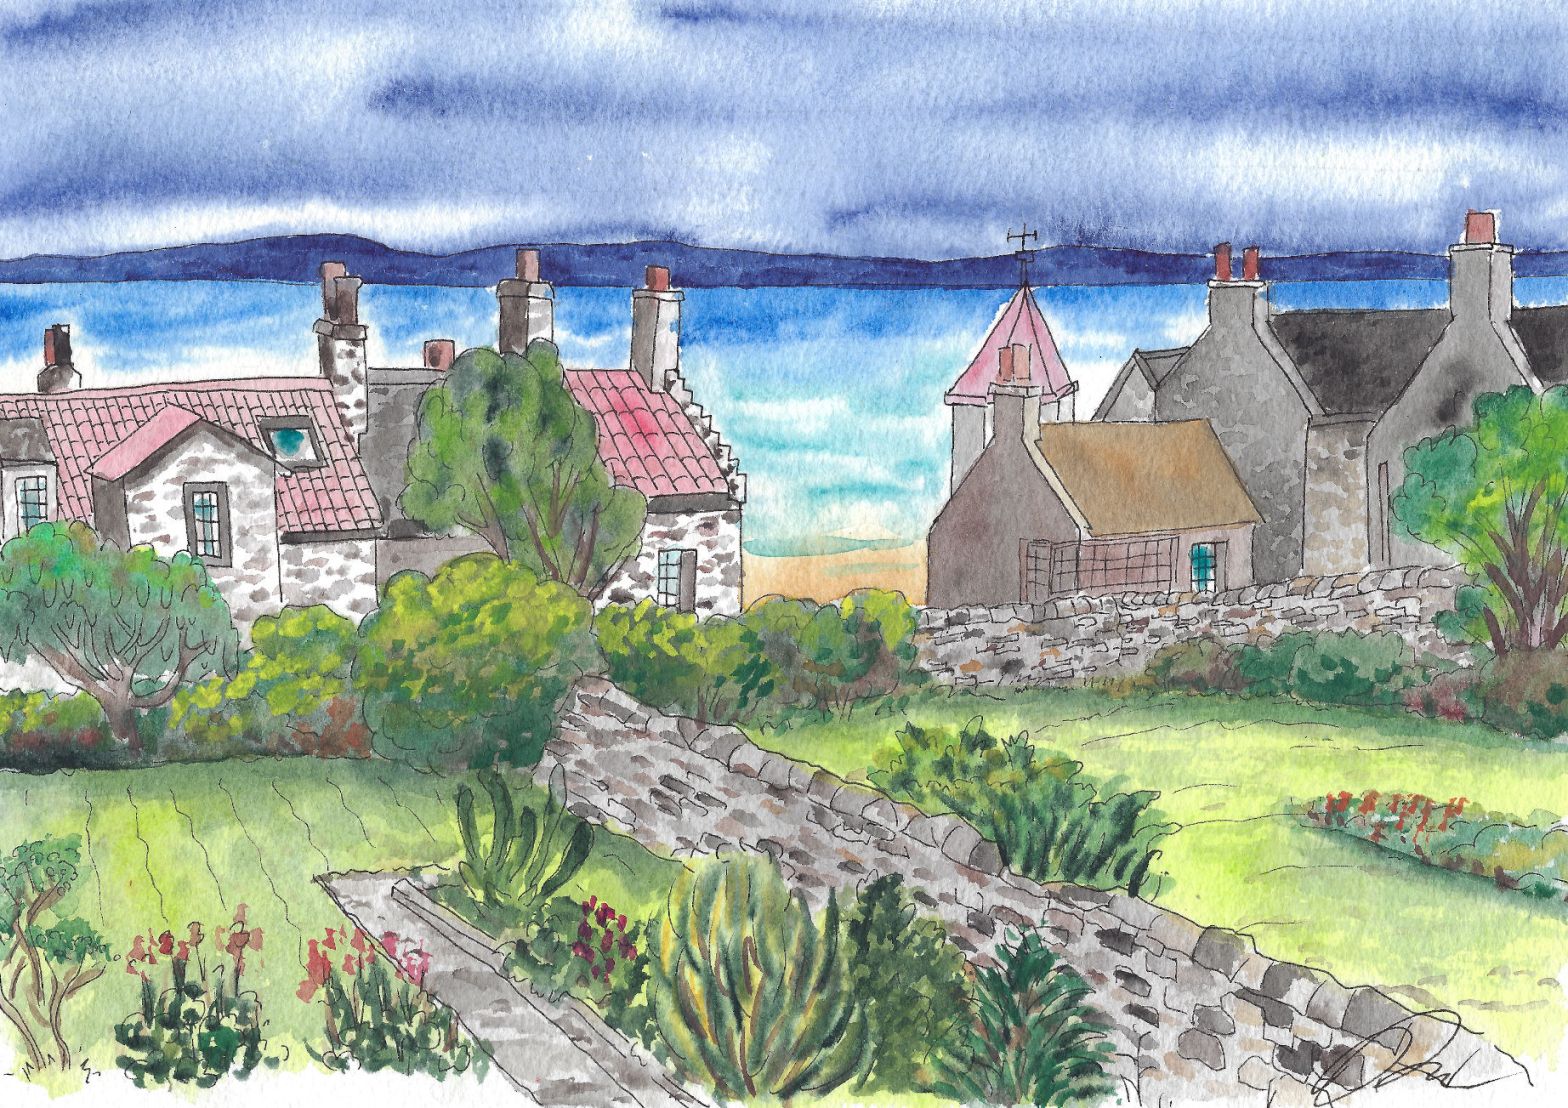 Watercolor of Elie village in Scotland with water in the background.